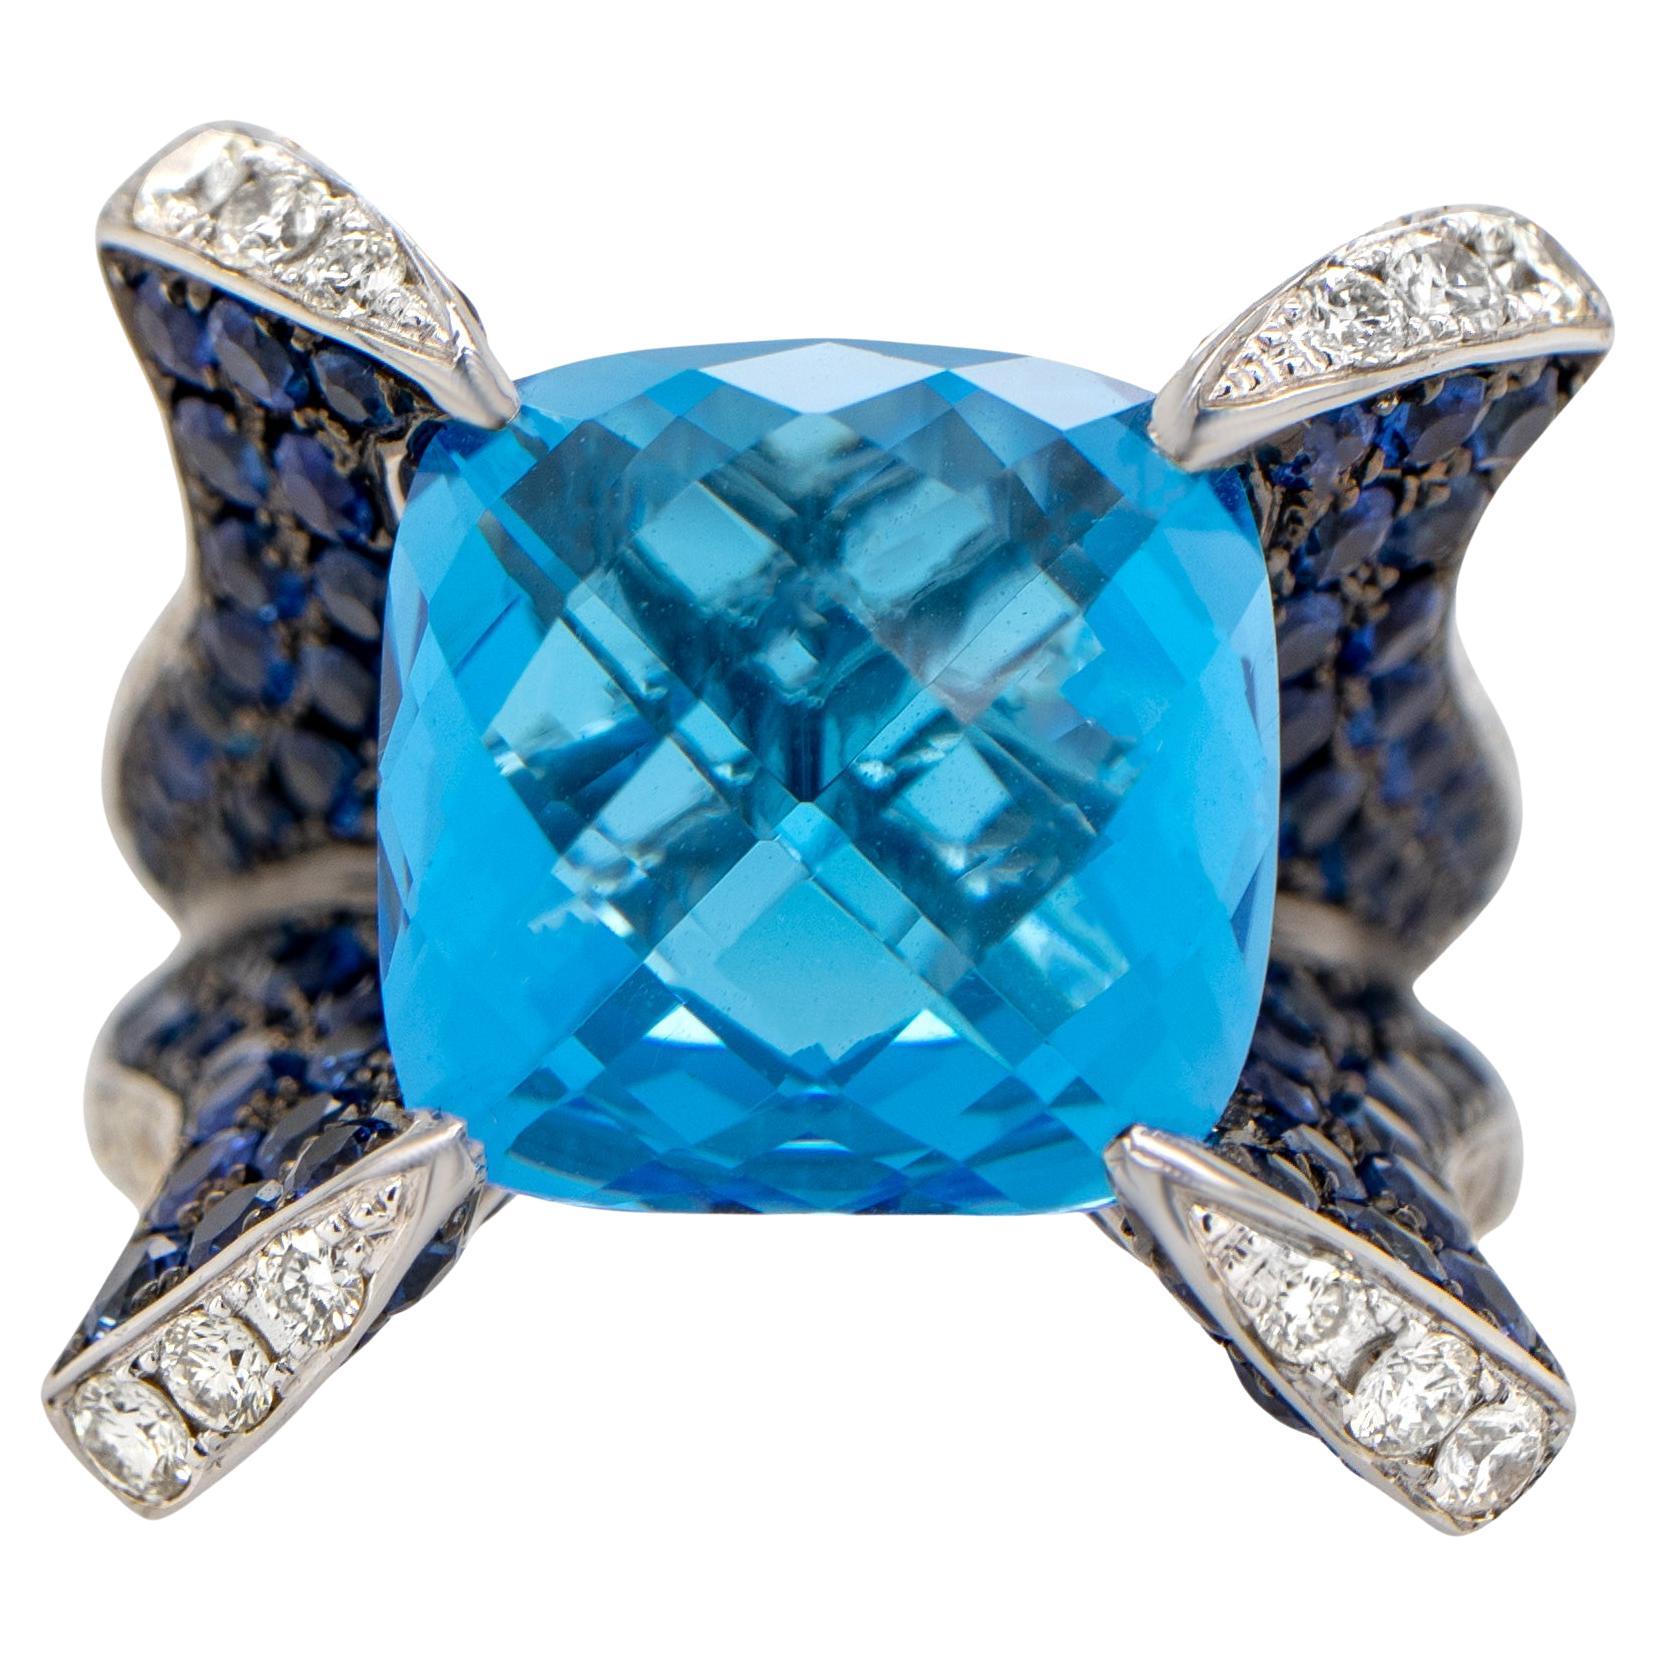 Swiss Blue Topaz Ring Diamonds and Sapphires 13.8 Carats 18K Gold For Sale